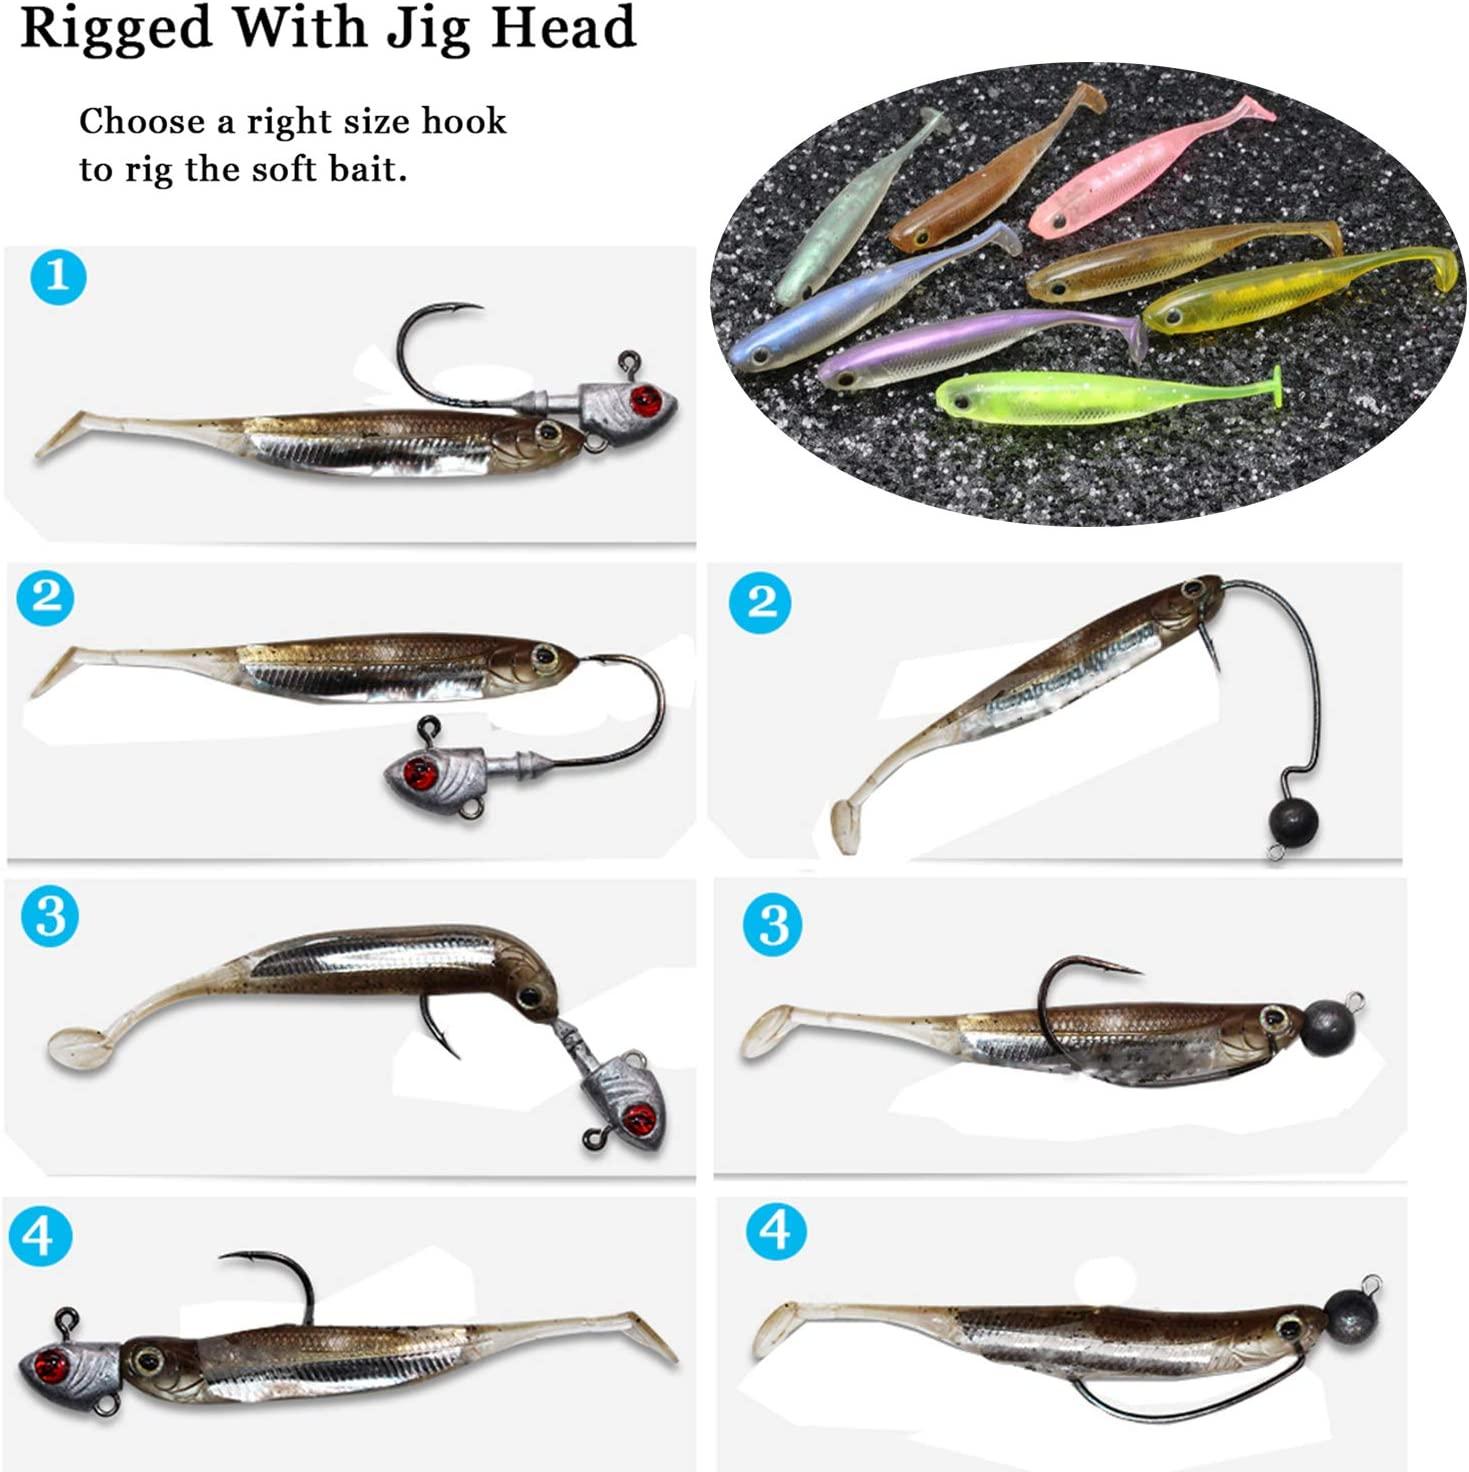 QualyQualy Soft Plastic Swimbait Paddle Tail Shad Lure Soft Bass Shad Bait  Shad Minnow Paddle Tail Swim Bait for Bass Trout Walleye Crappie 2.75in 3.14 in 3.94in 5in 1# 2.75in - 6Pcs